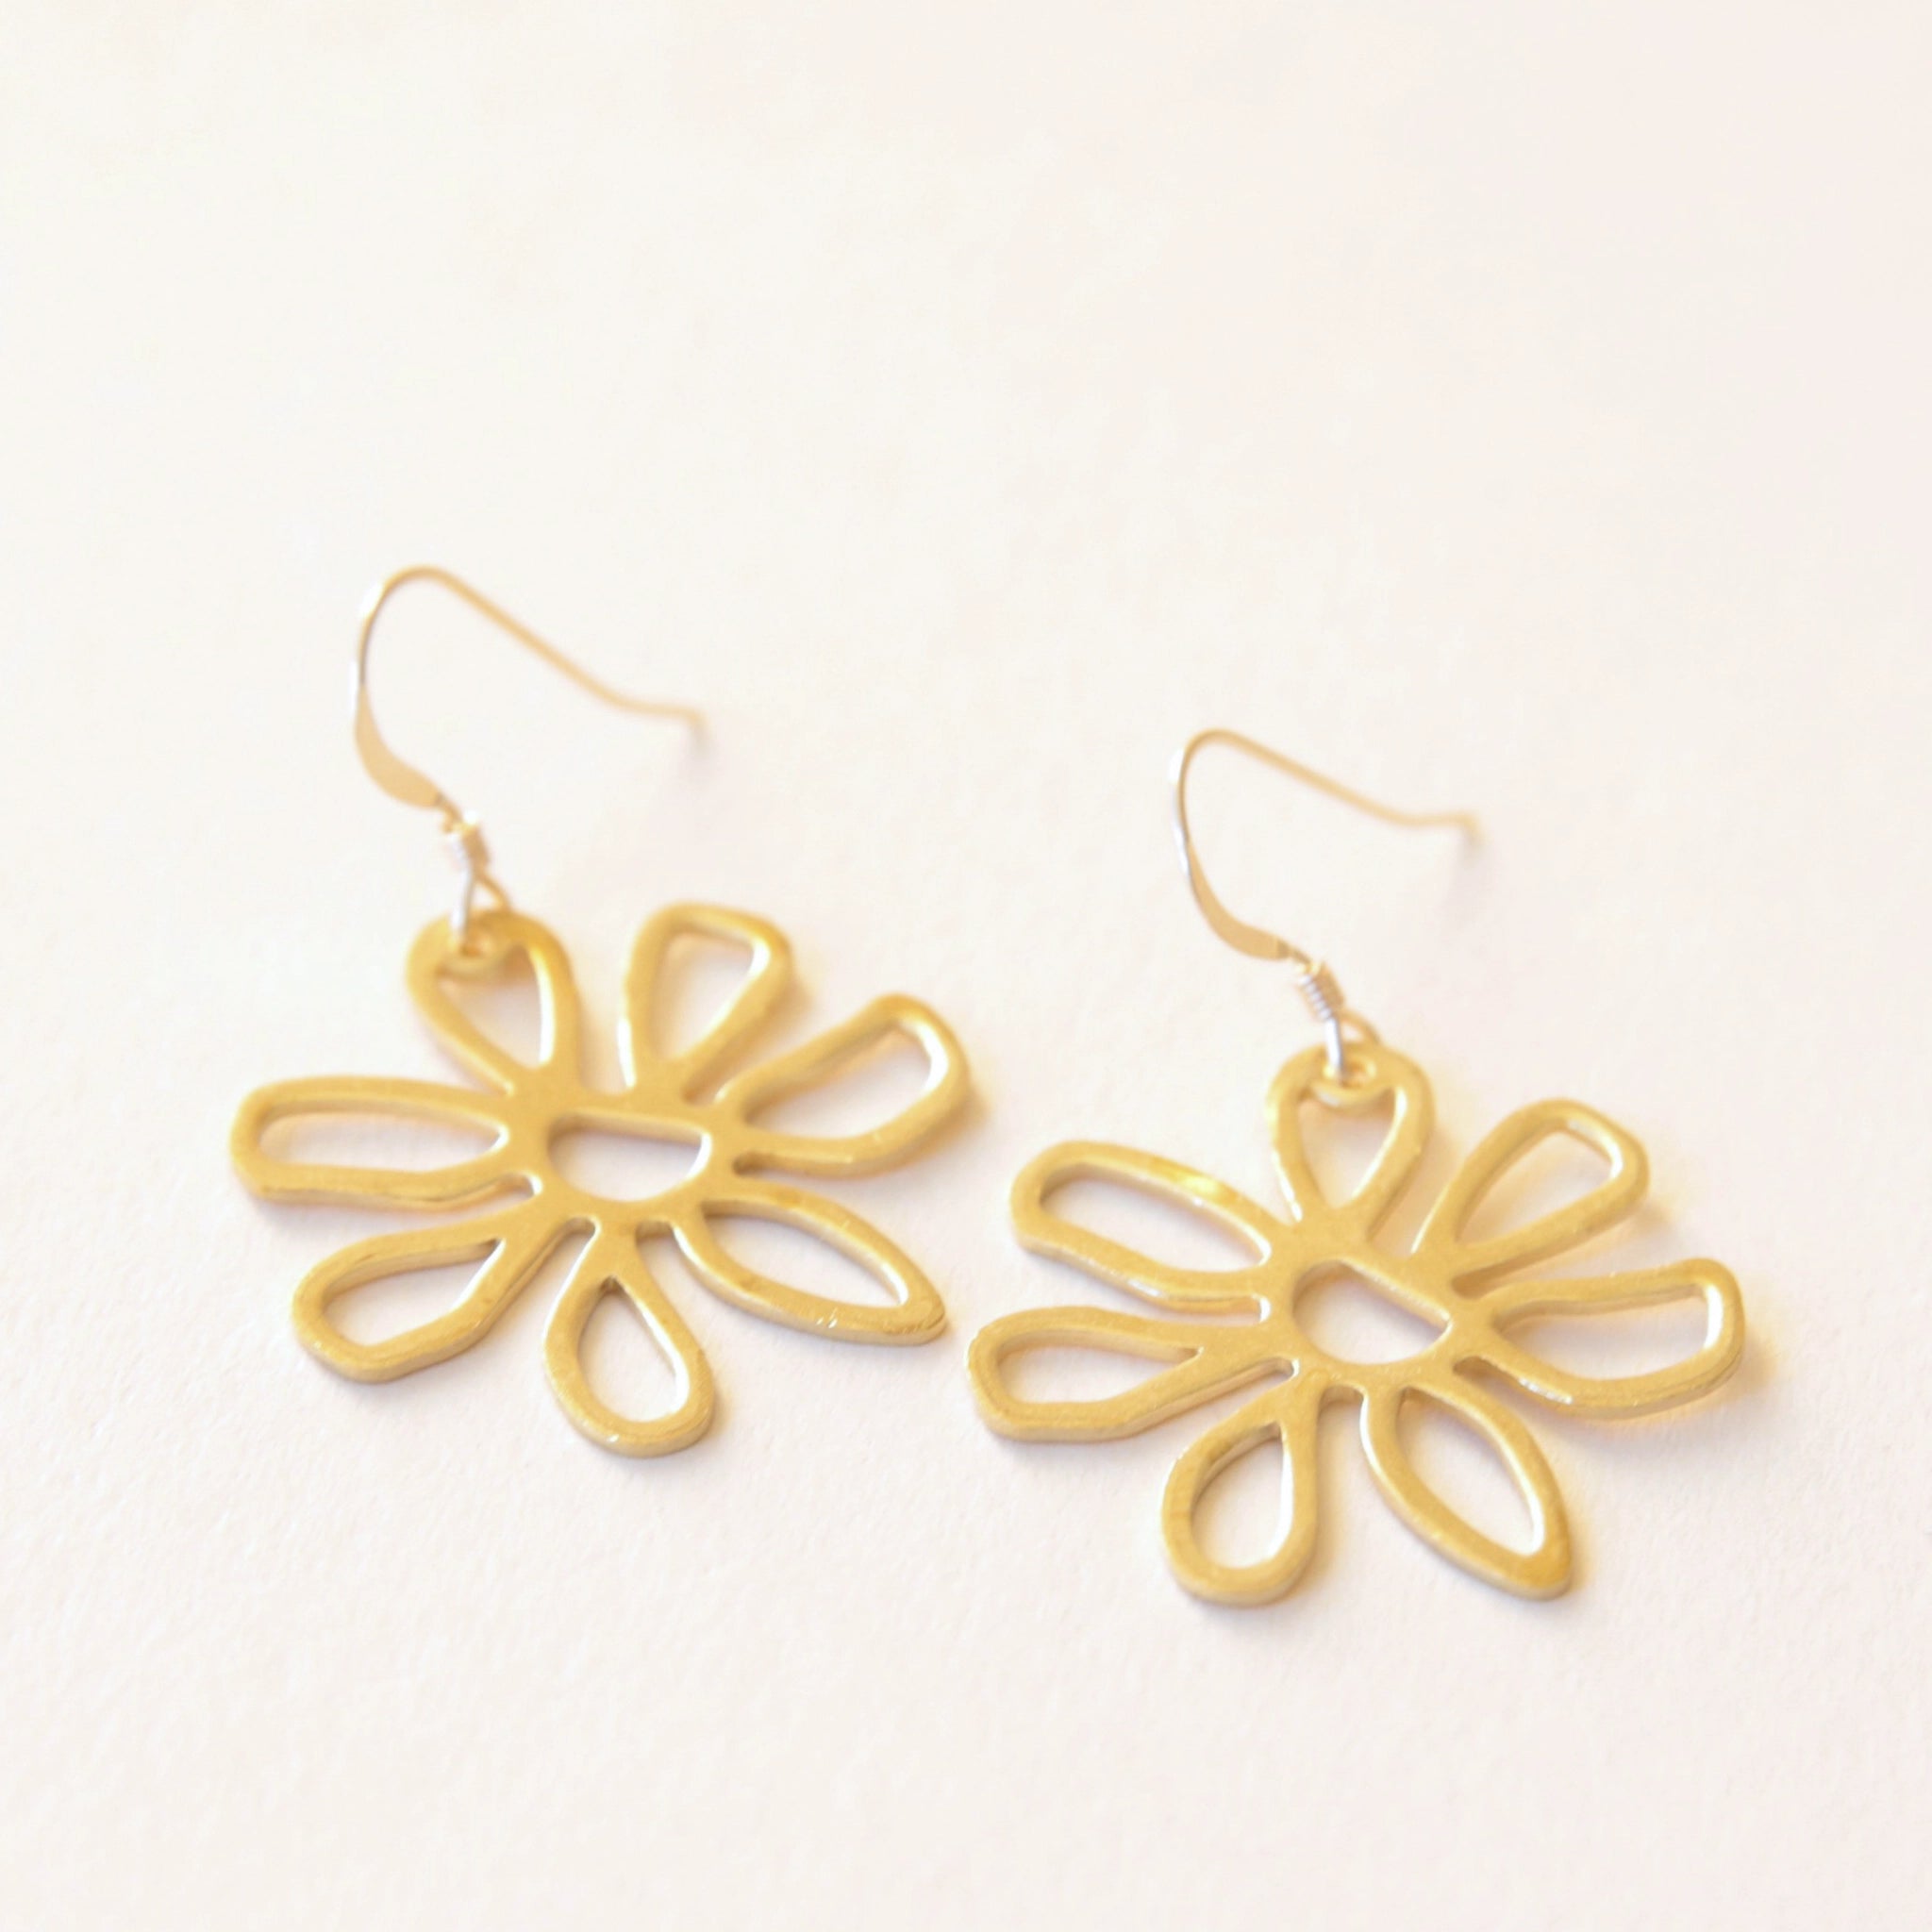 Gold hook earrings with a gold outline flower design.